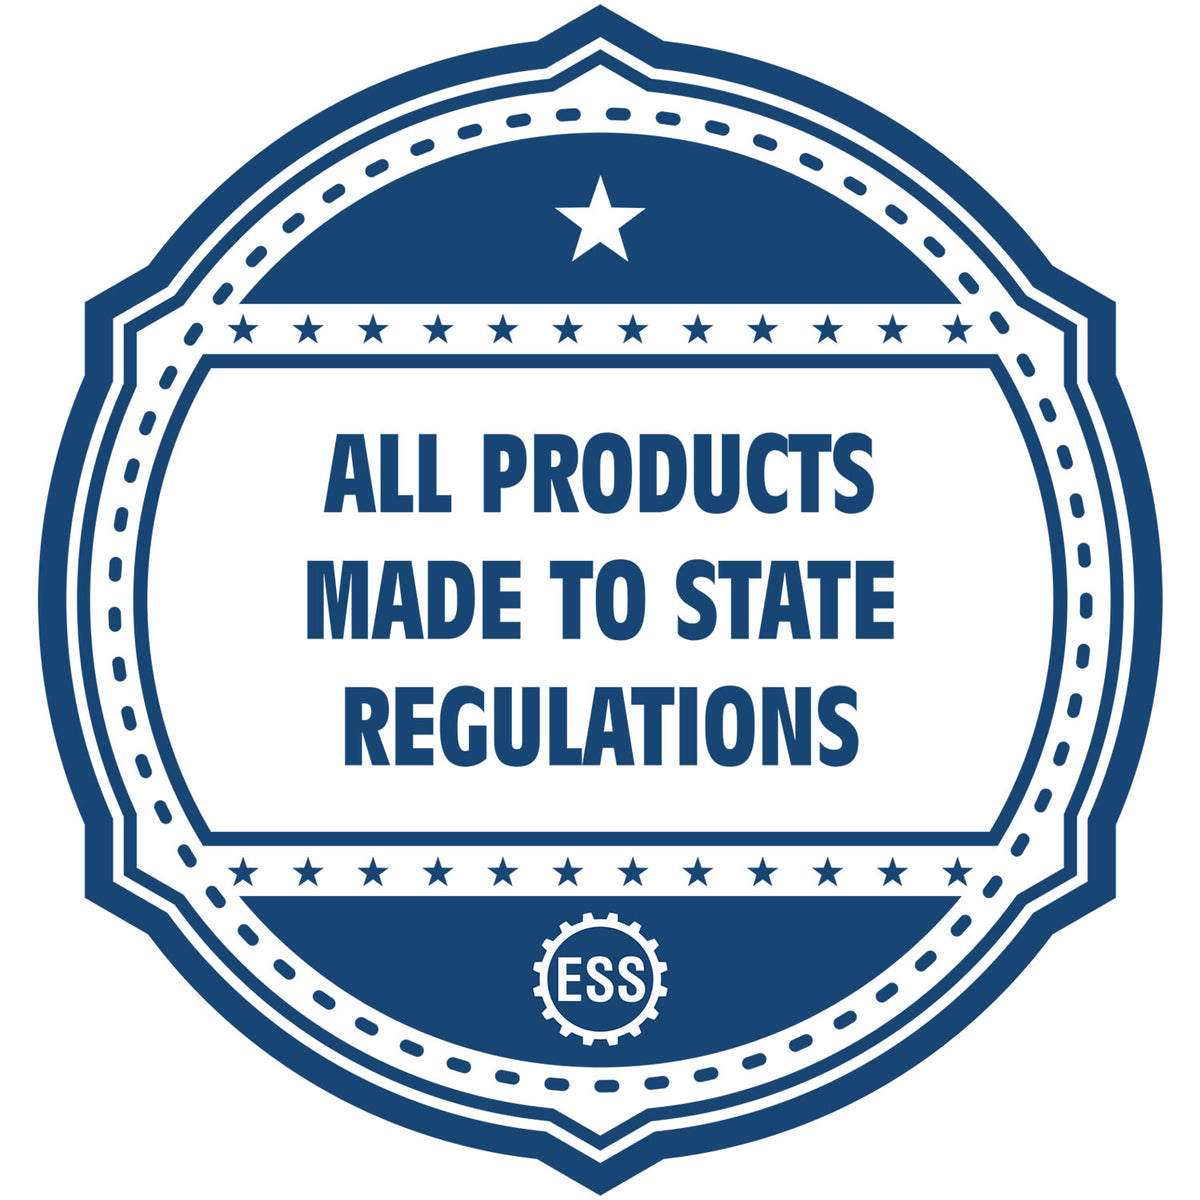 An icon or badge element for the Slim Pre-Inked Pennsylvania Professional Engineer Seal Stamp showing that this product is made in compliance with state regulations.